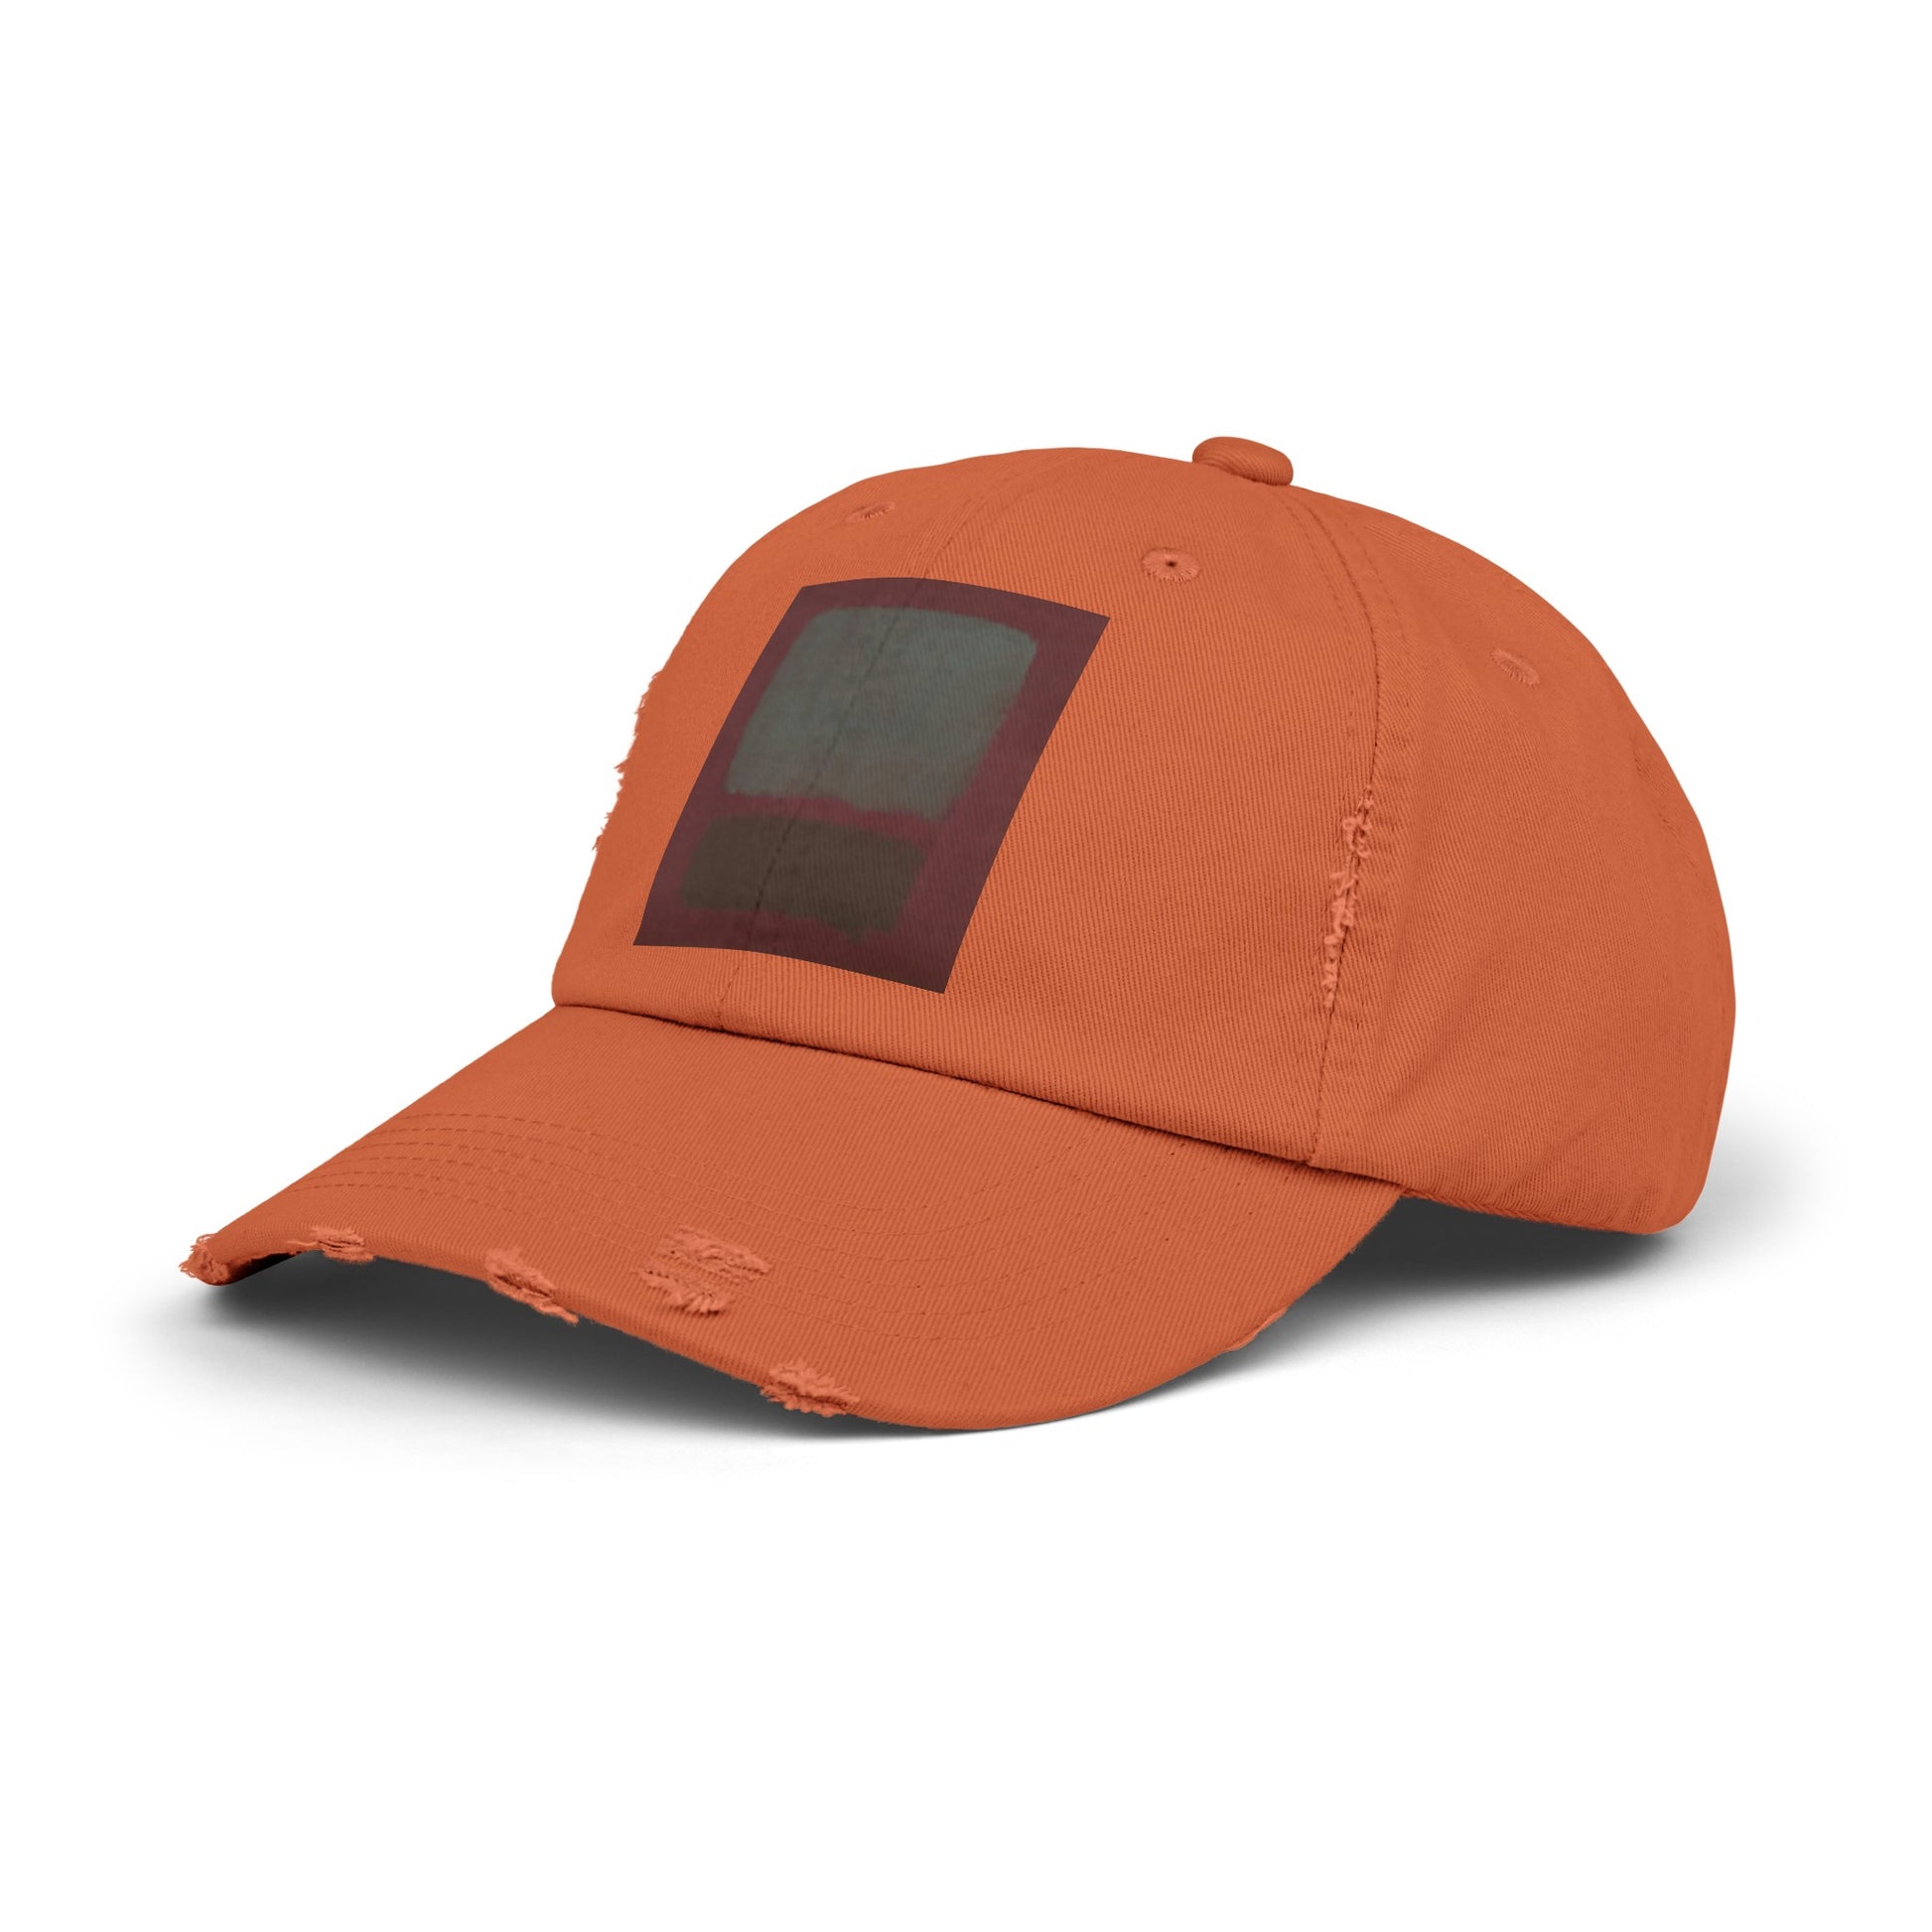 an orange hat with a patch on the front of it